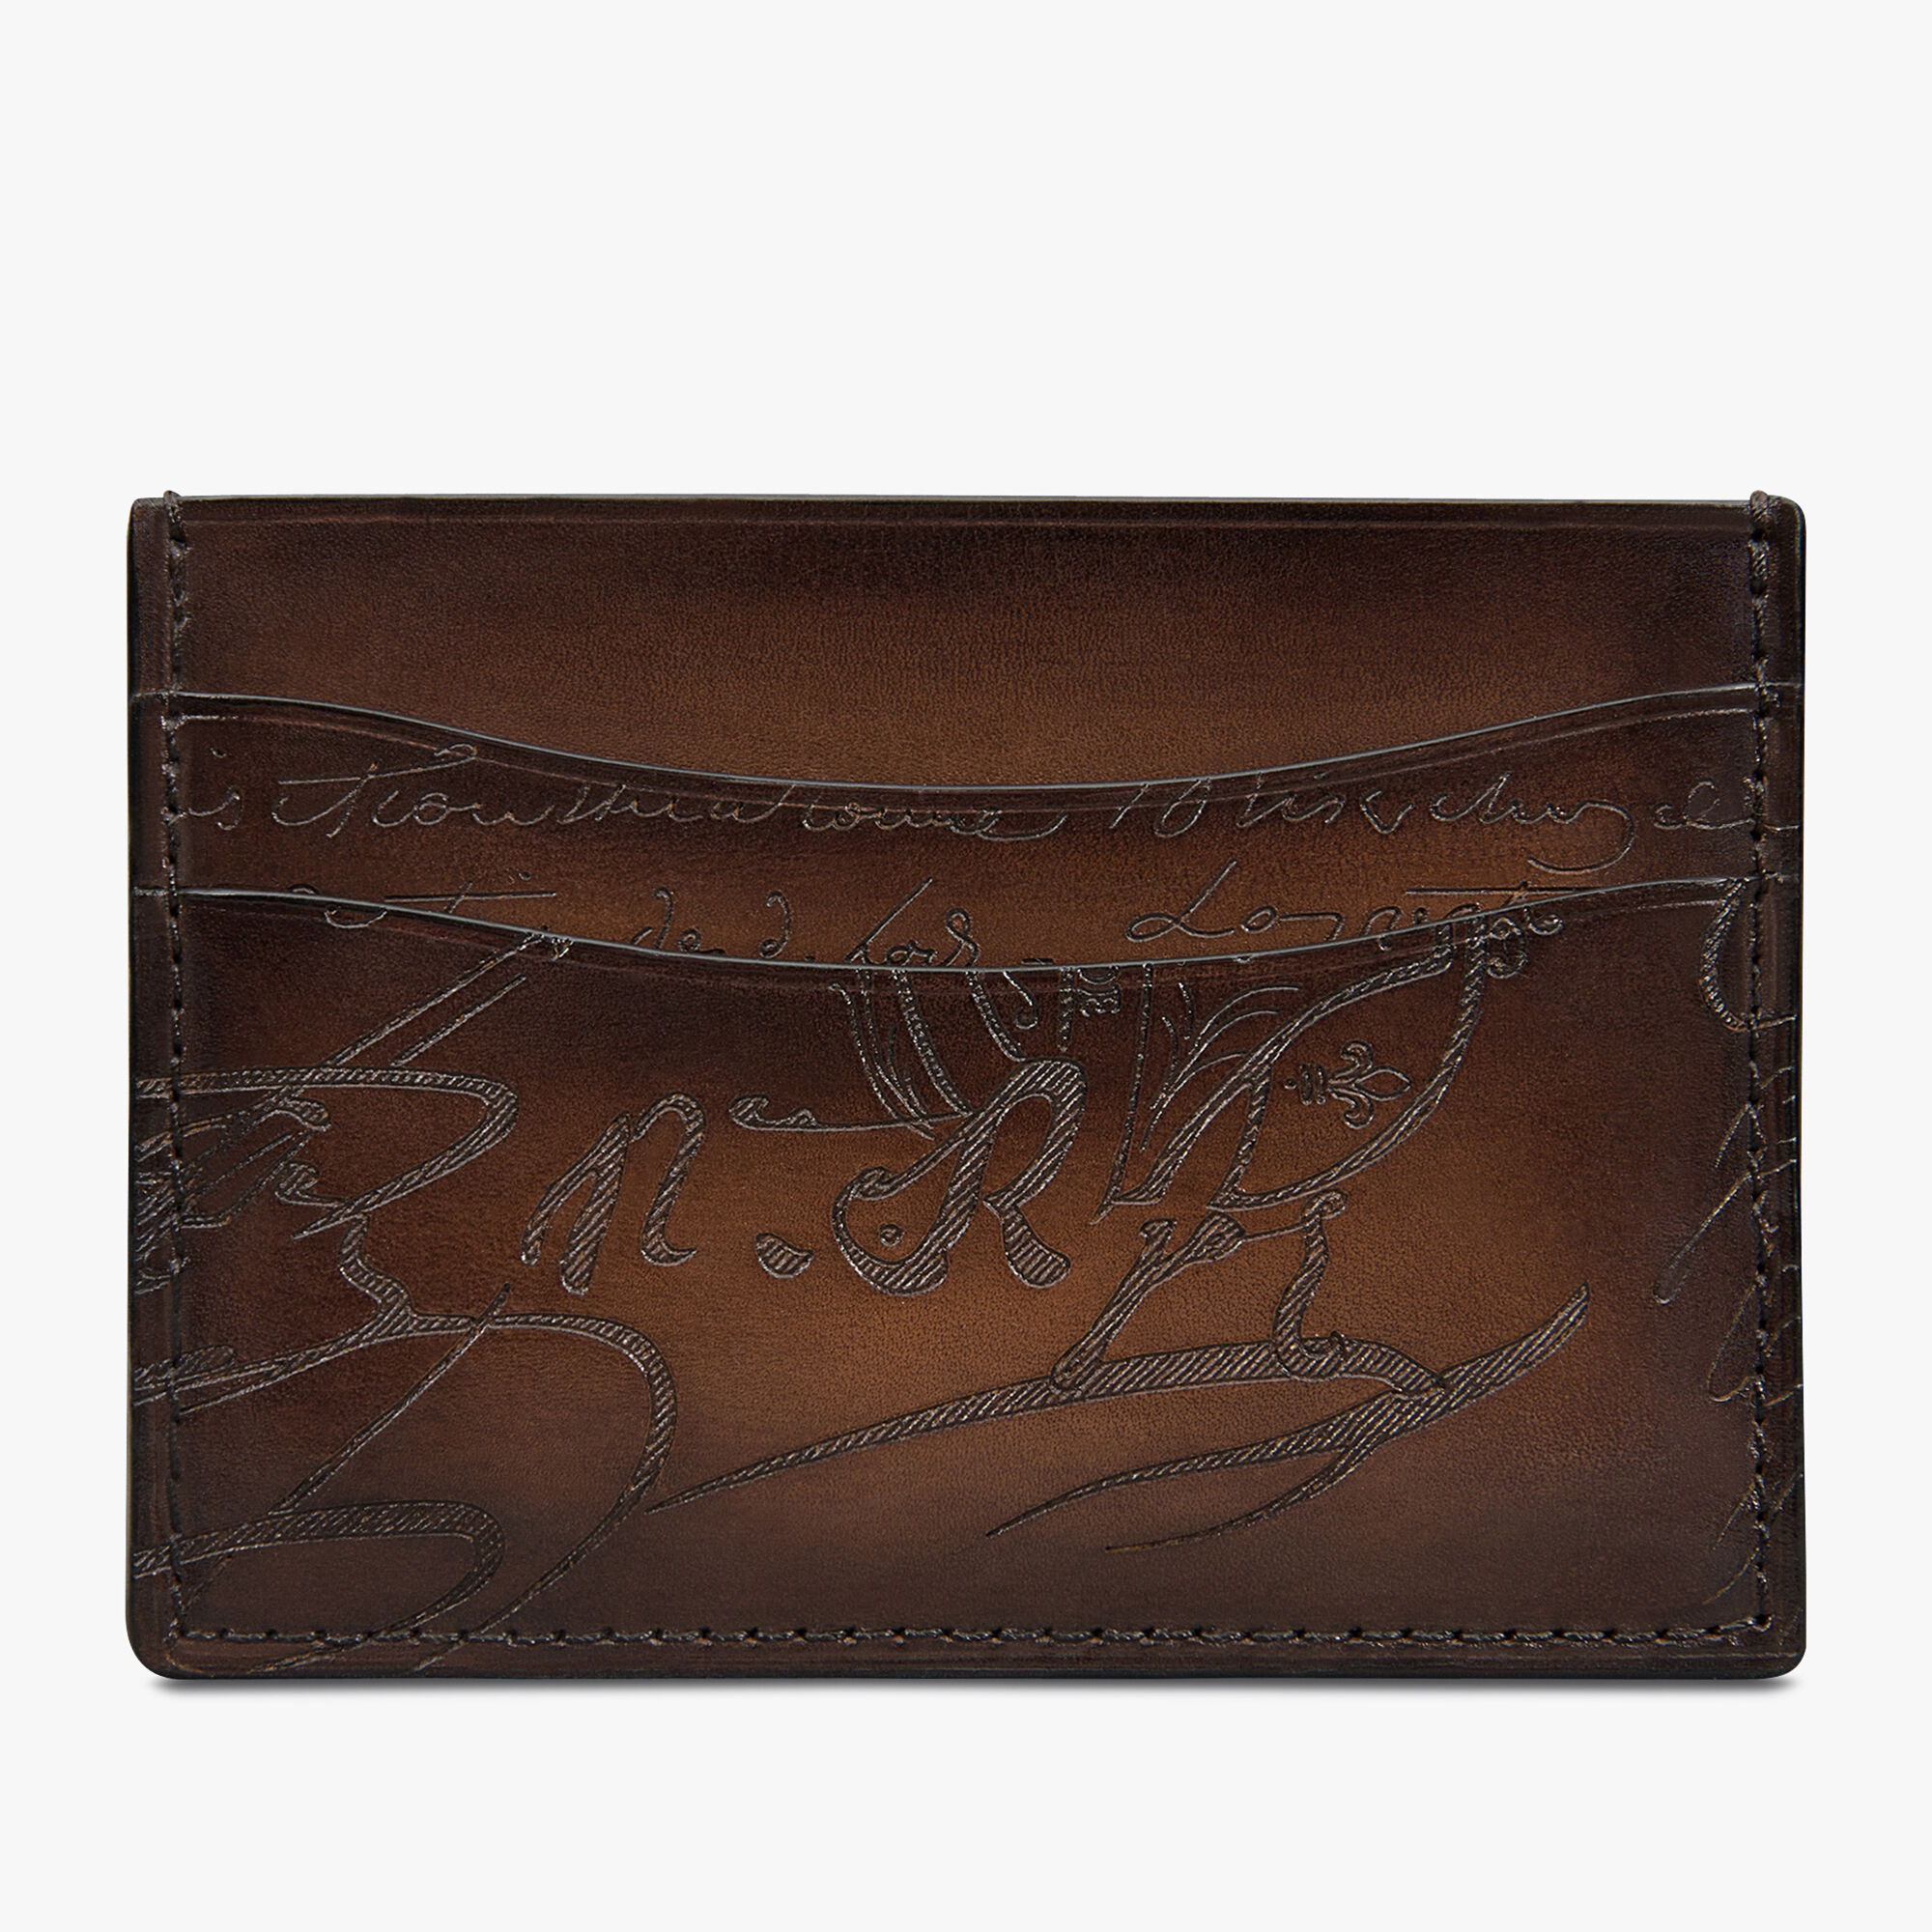 Cardholder collections by Berluti - GB